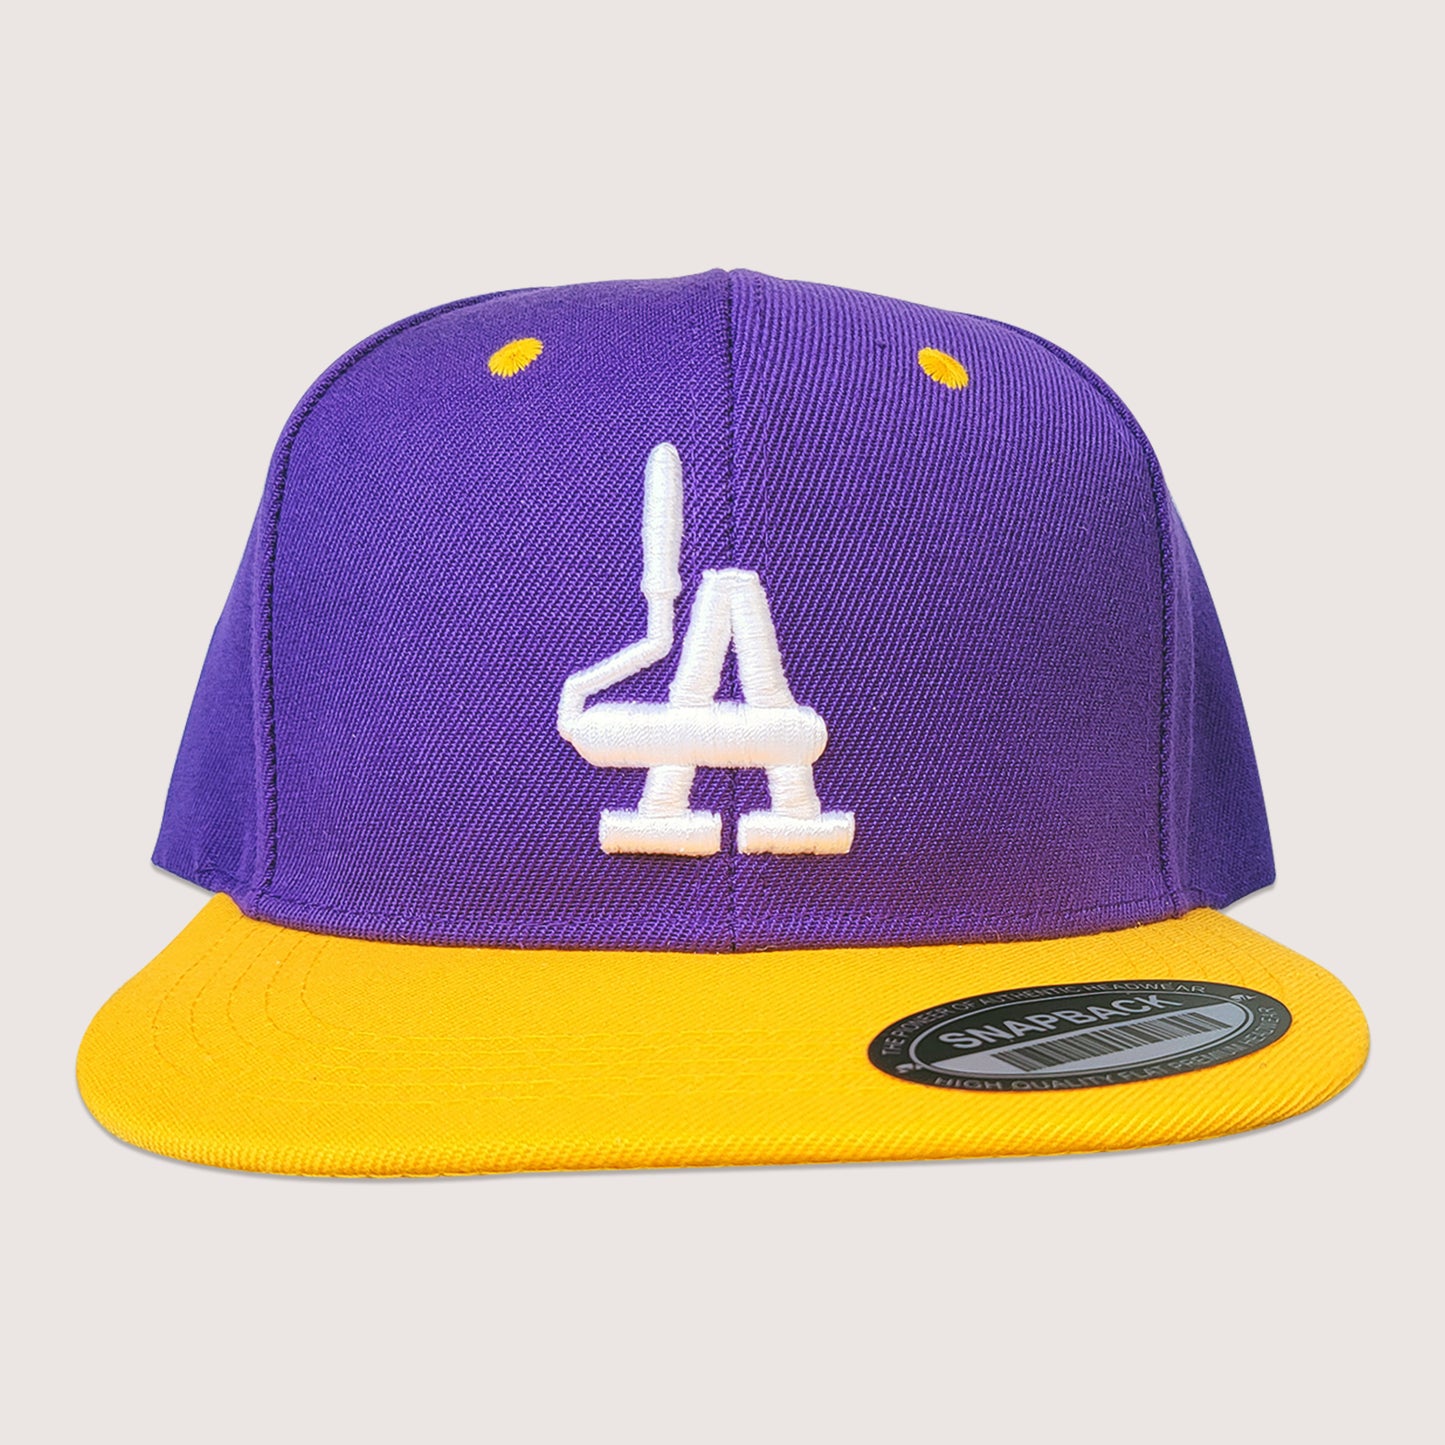 Phatcaps brand baseball cap in purple with white embroidery